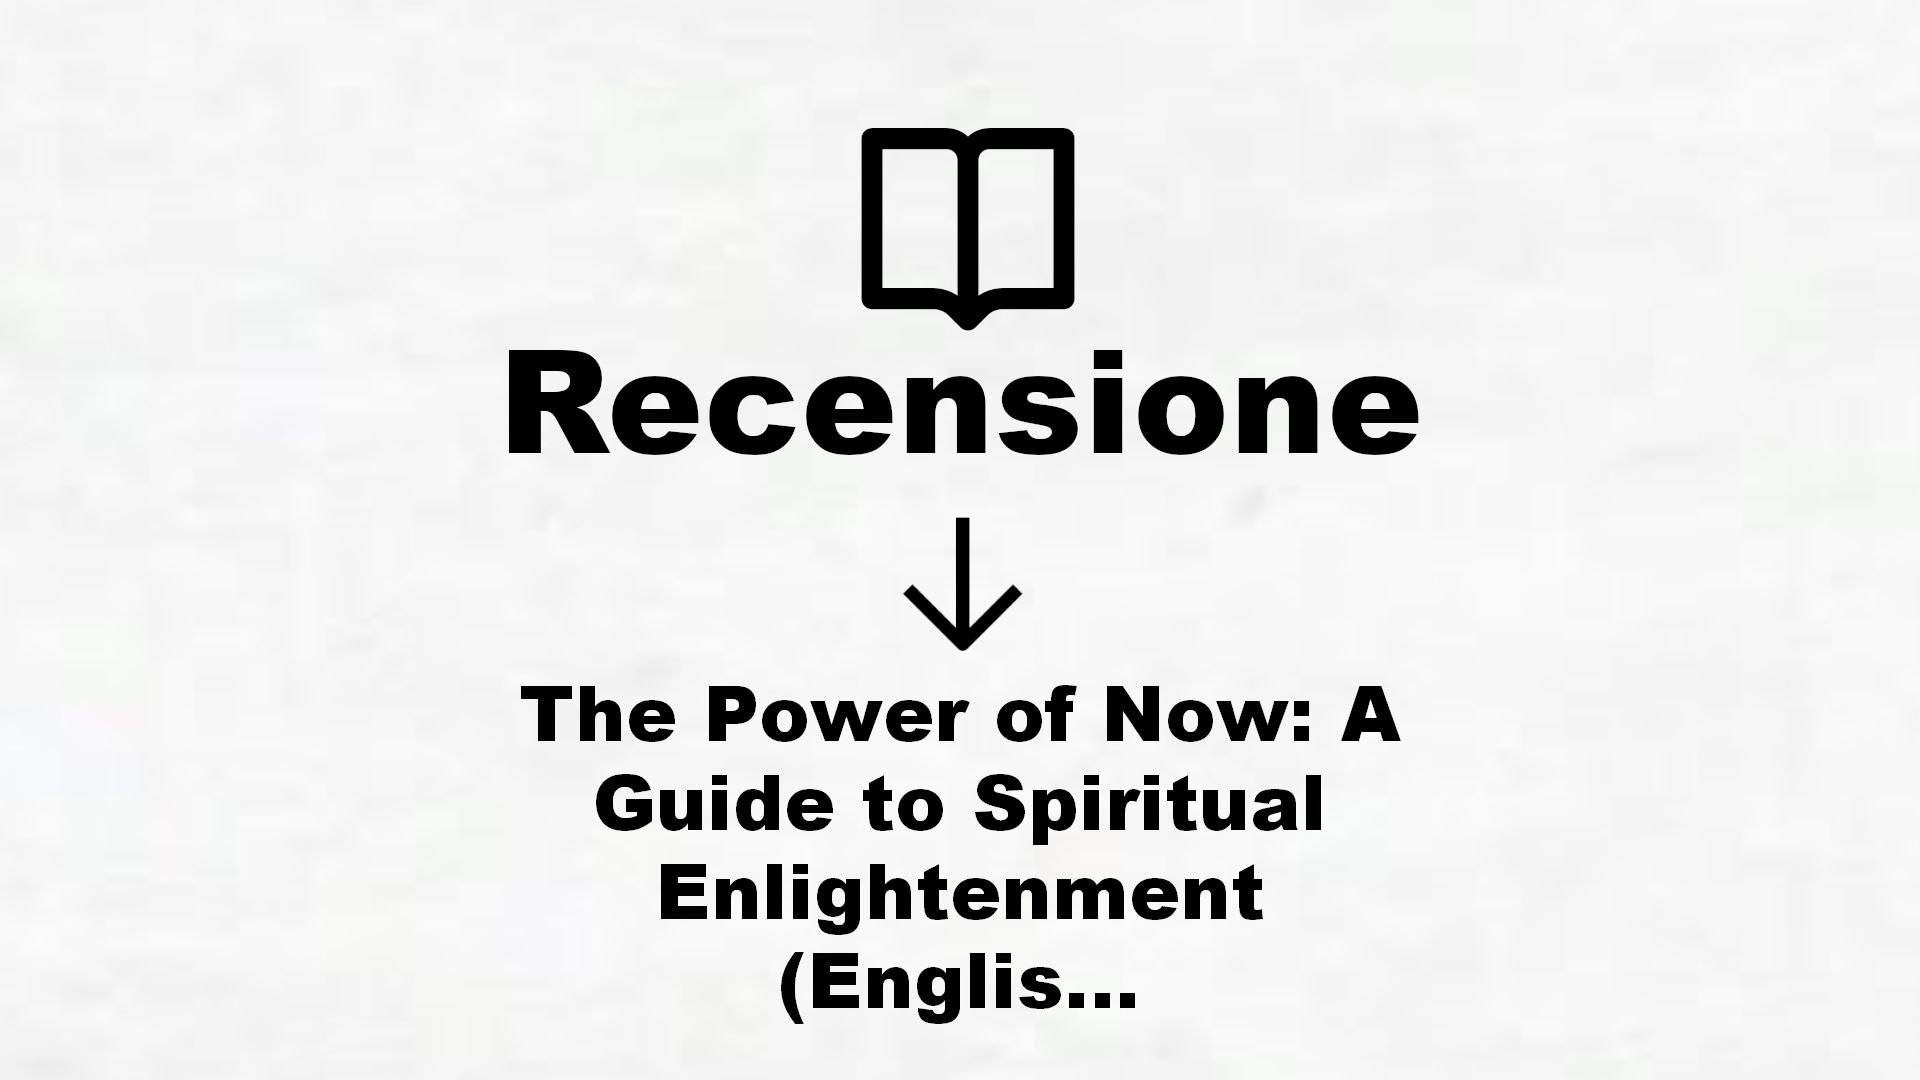 The Power of Now: A Guide to Spiritual Enlightenment (English Edition) – Recensione Libro